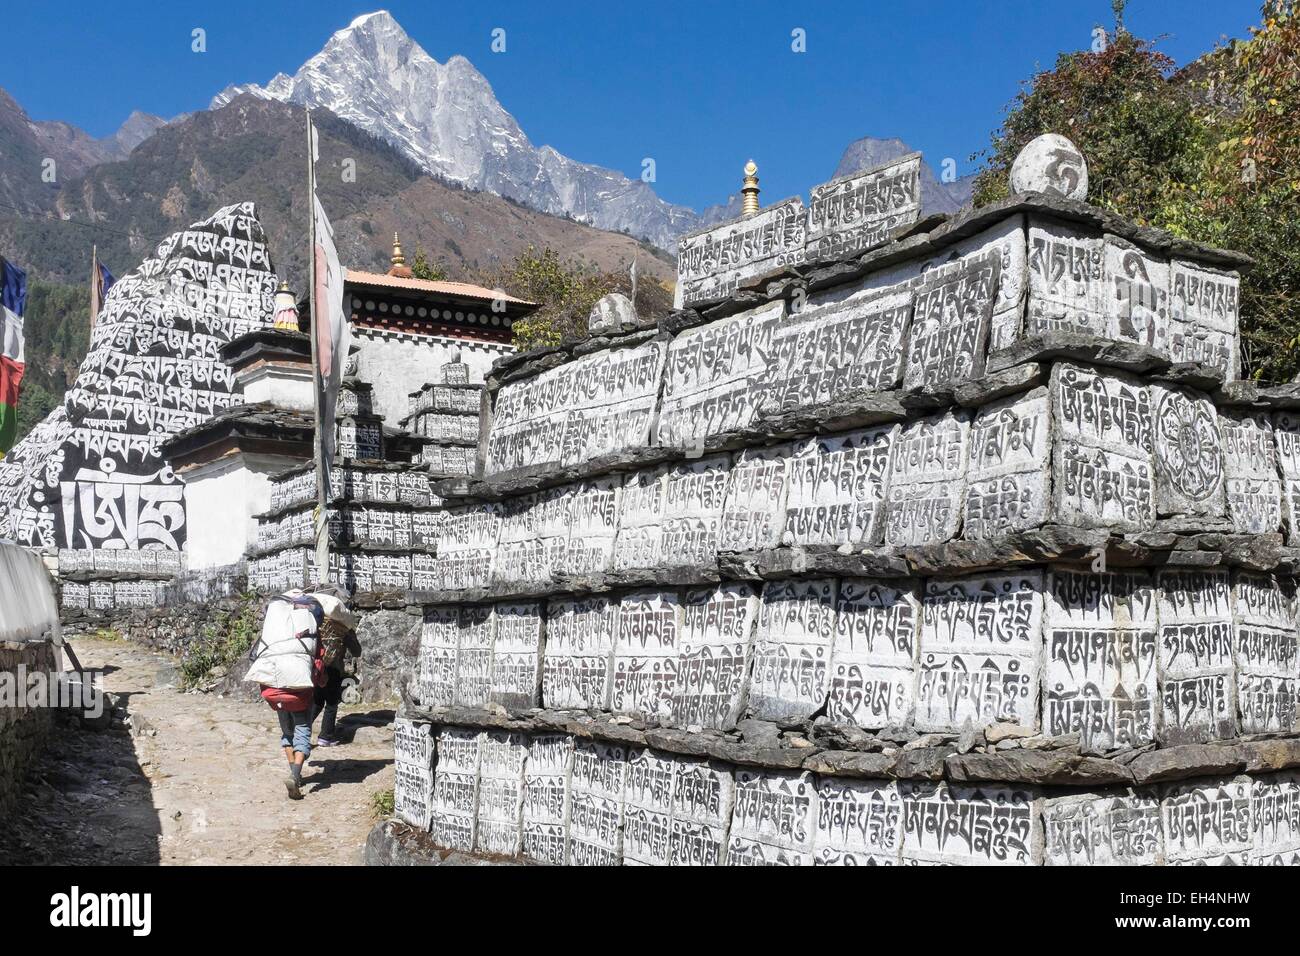 Nepal, Sagarmatha National Park, listed as World Heritage by UNESCO, Solu Khumbu District, Everest region, manis, flat stones engraved with prayers or religious drawings Stock Photo